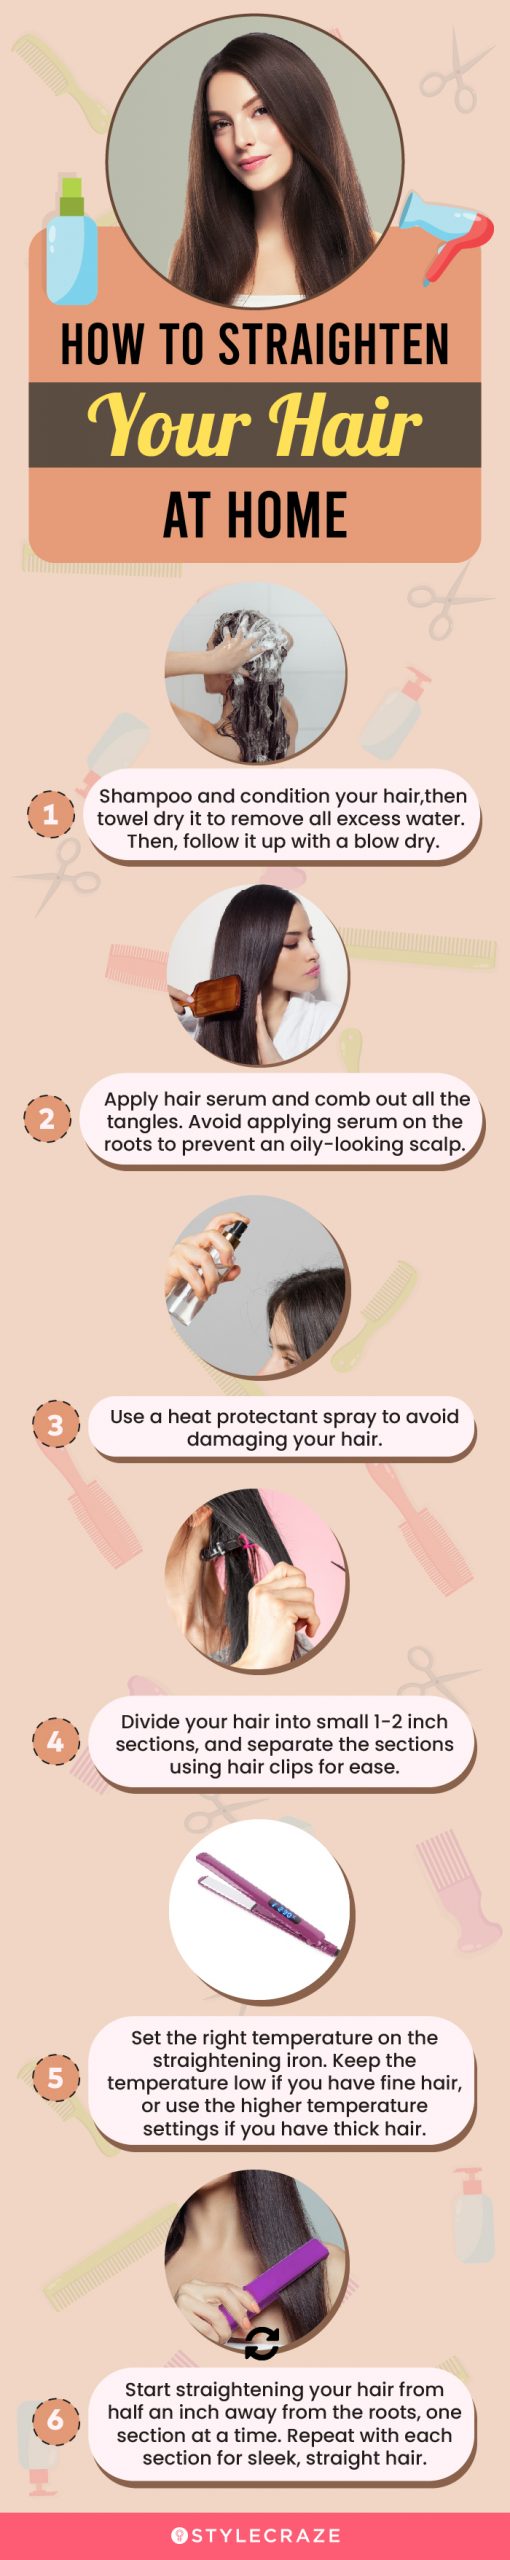 how to straighten your hair at home (infographic)